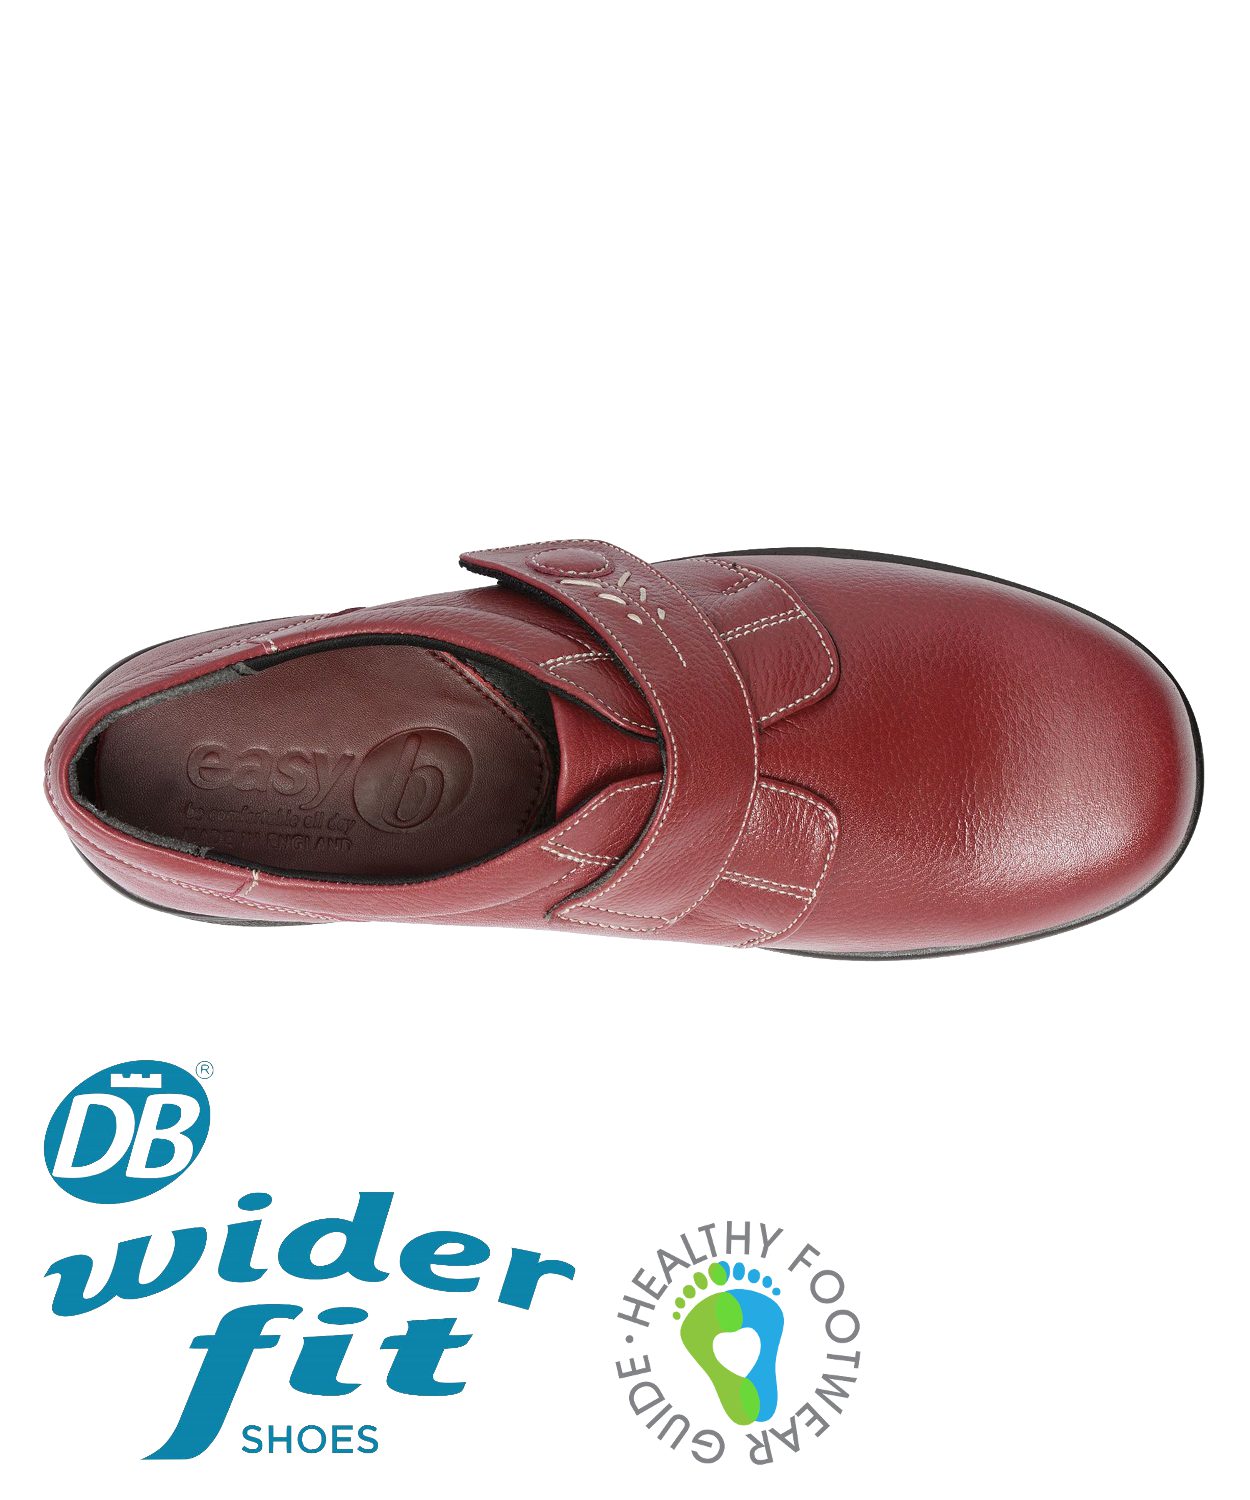 DB Wider fit ladies shoes - Exclusive 